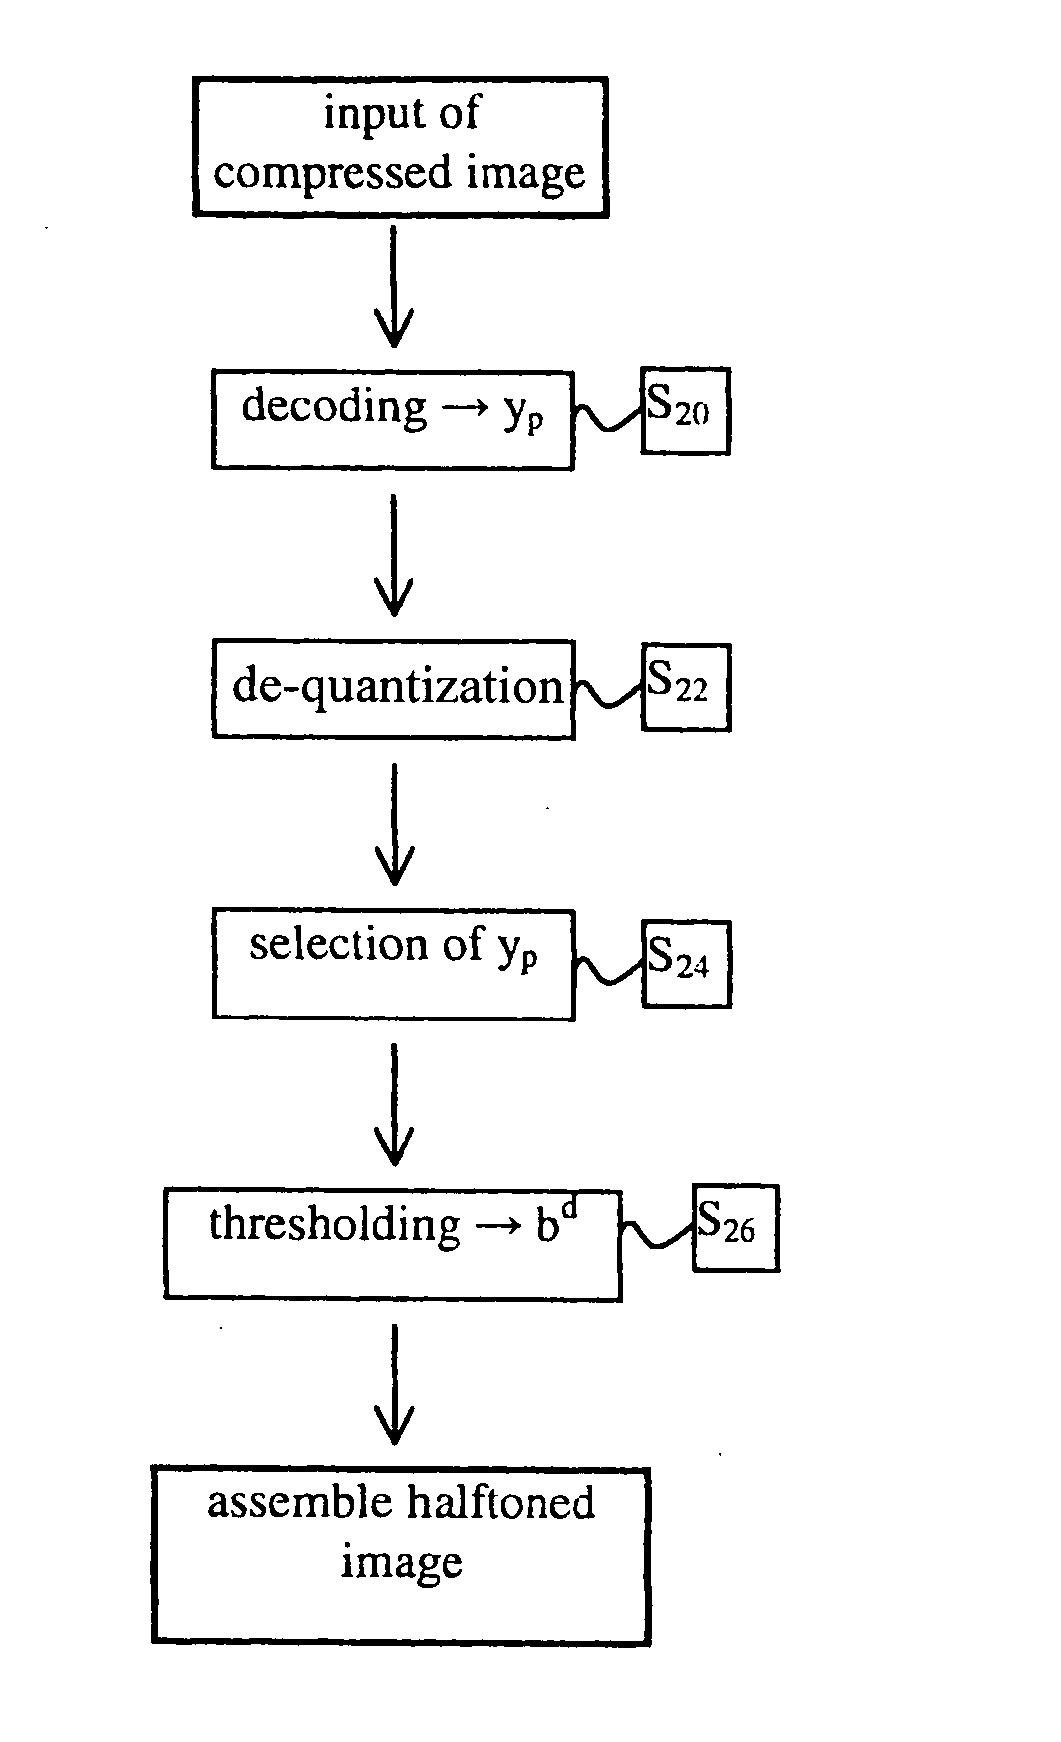 Method and apparatus for generating a halftoned image from a compressed image